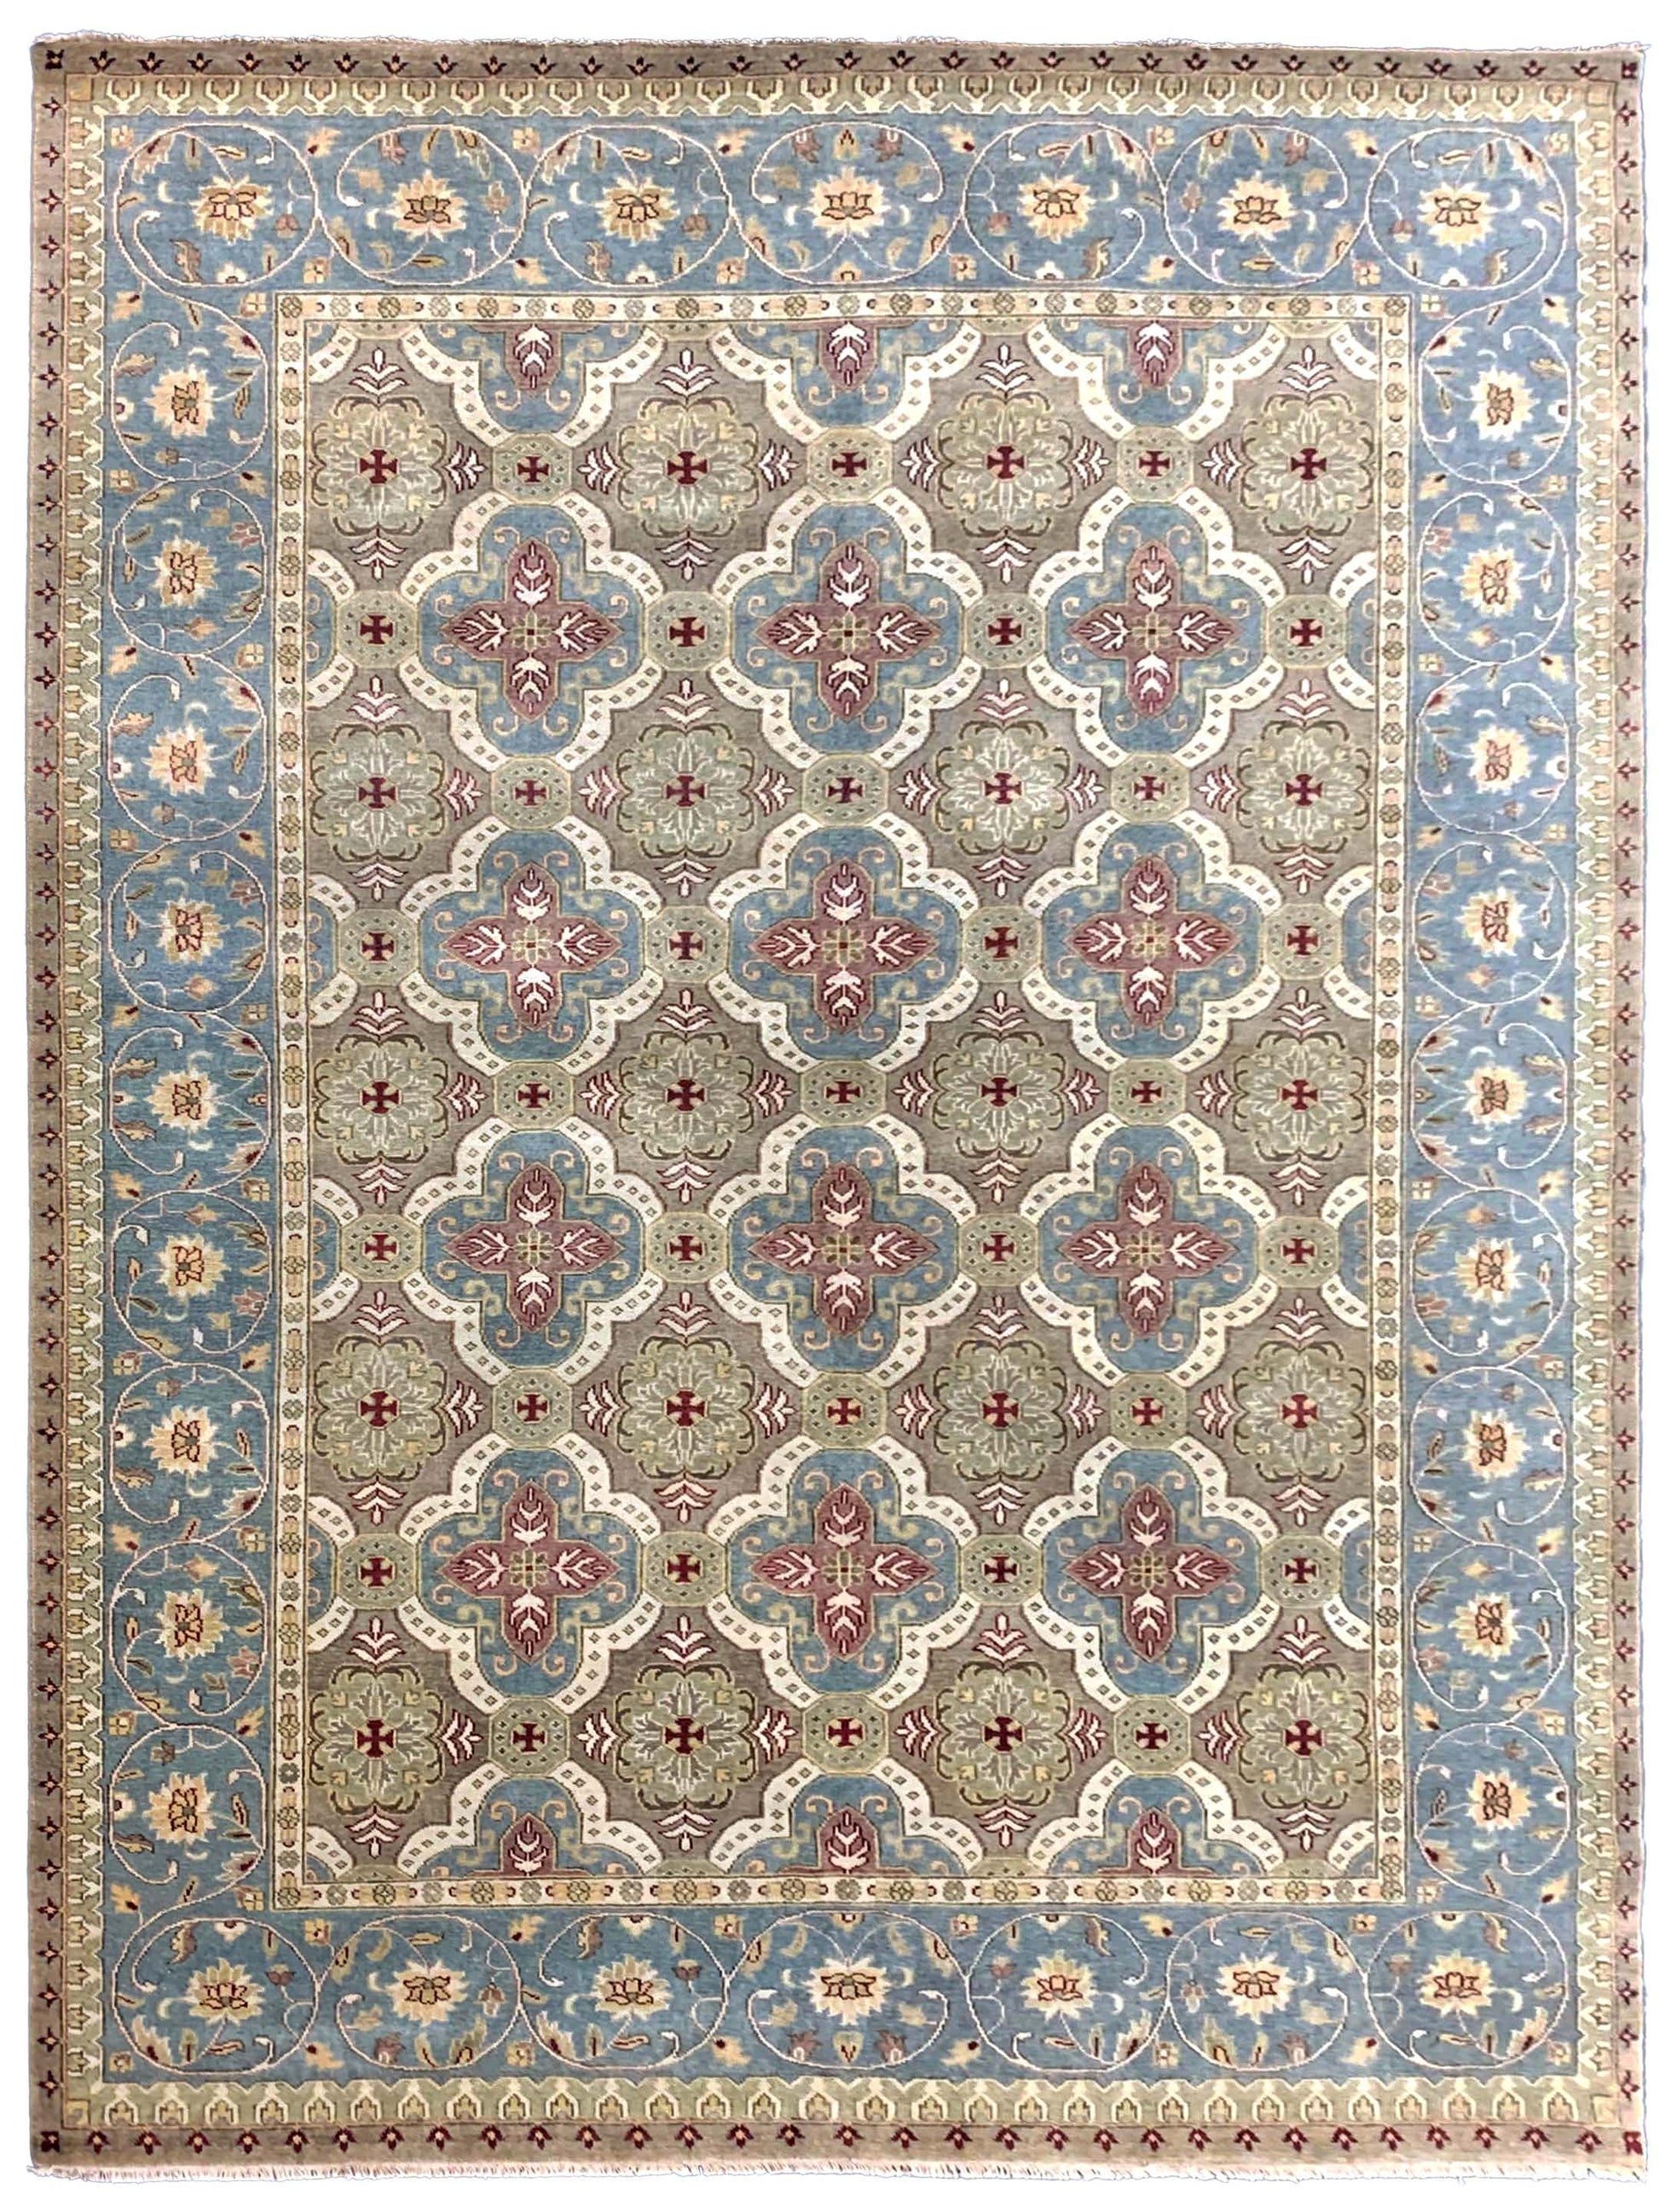 Artisan Cameron CB-202 Lt.Blue Traditional Knotted Rug